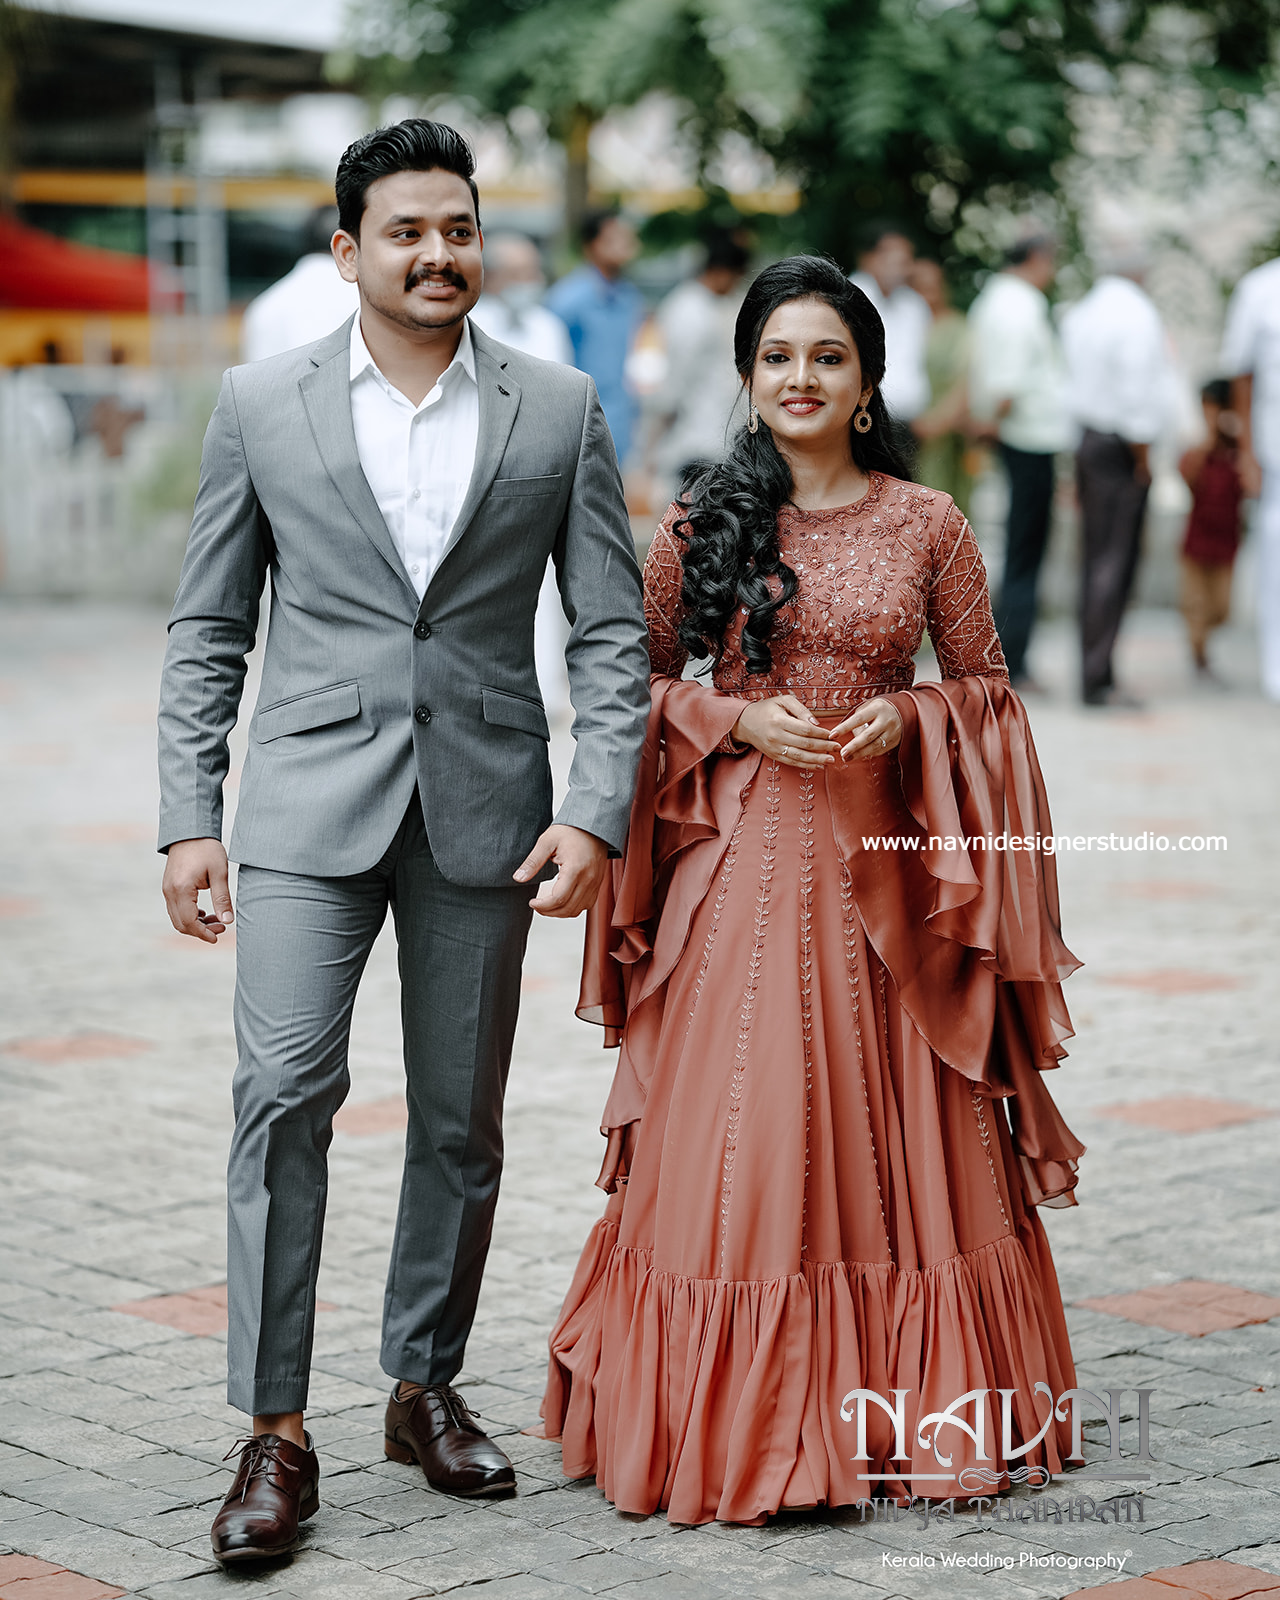 What is the dress code for a Malayalee wedding reception in Kerala? - Quora